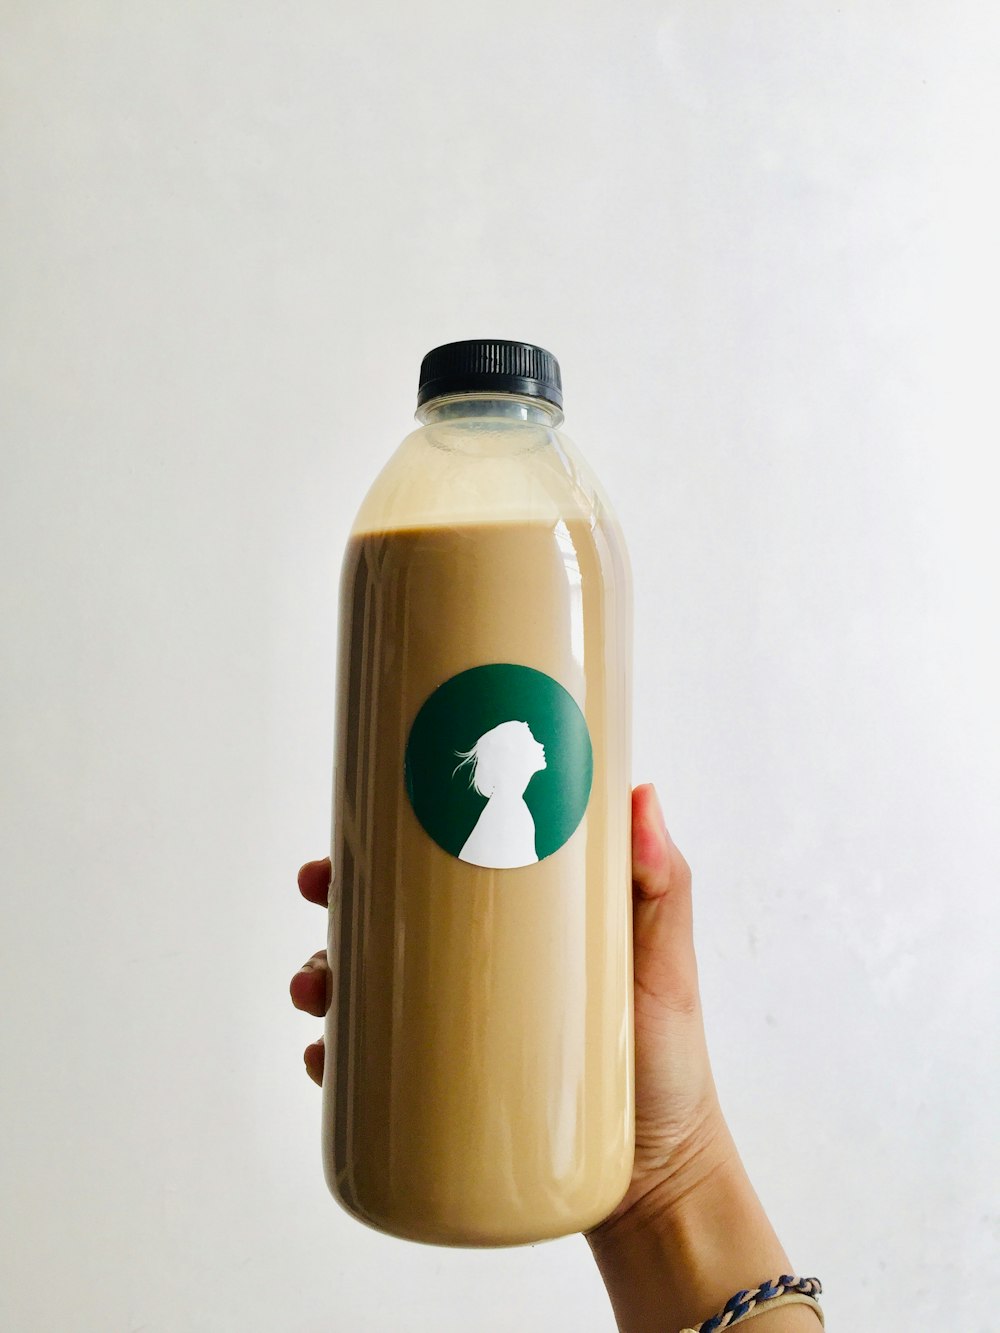 Coffee Bottle Pictures  Download Free Images on Unsplash